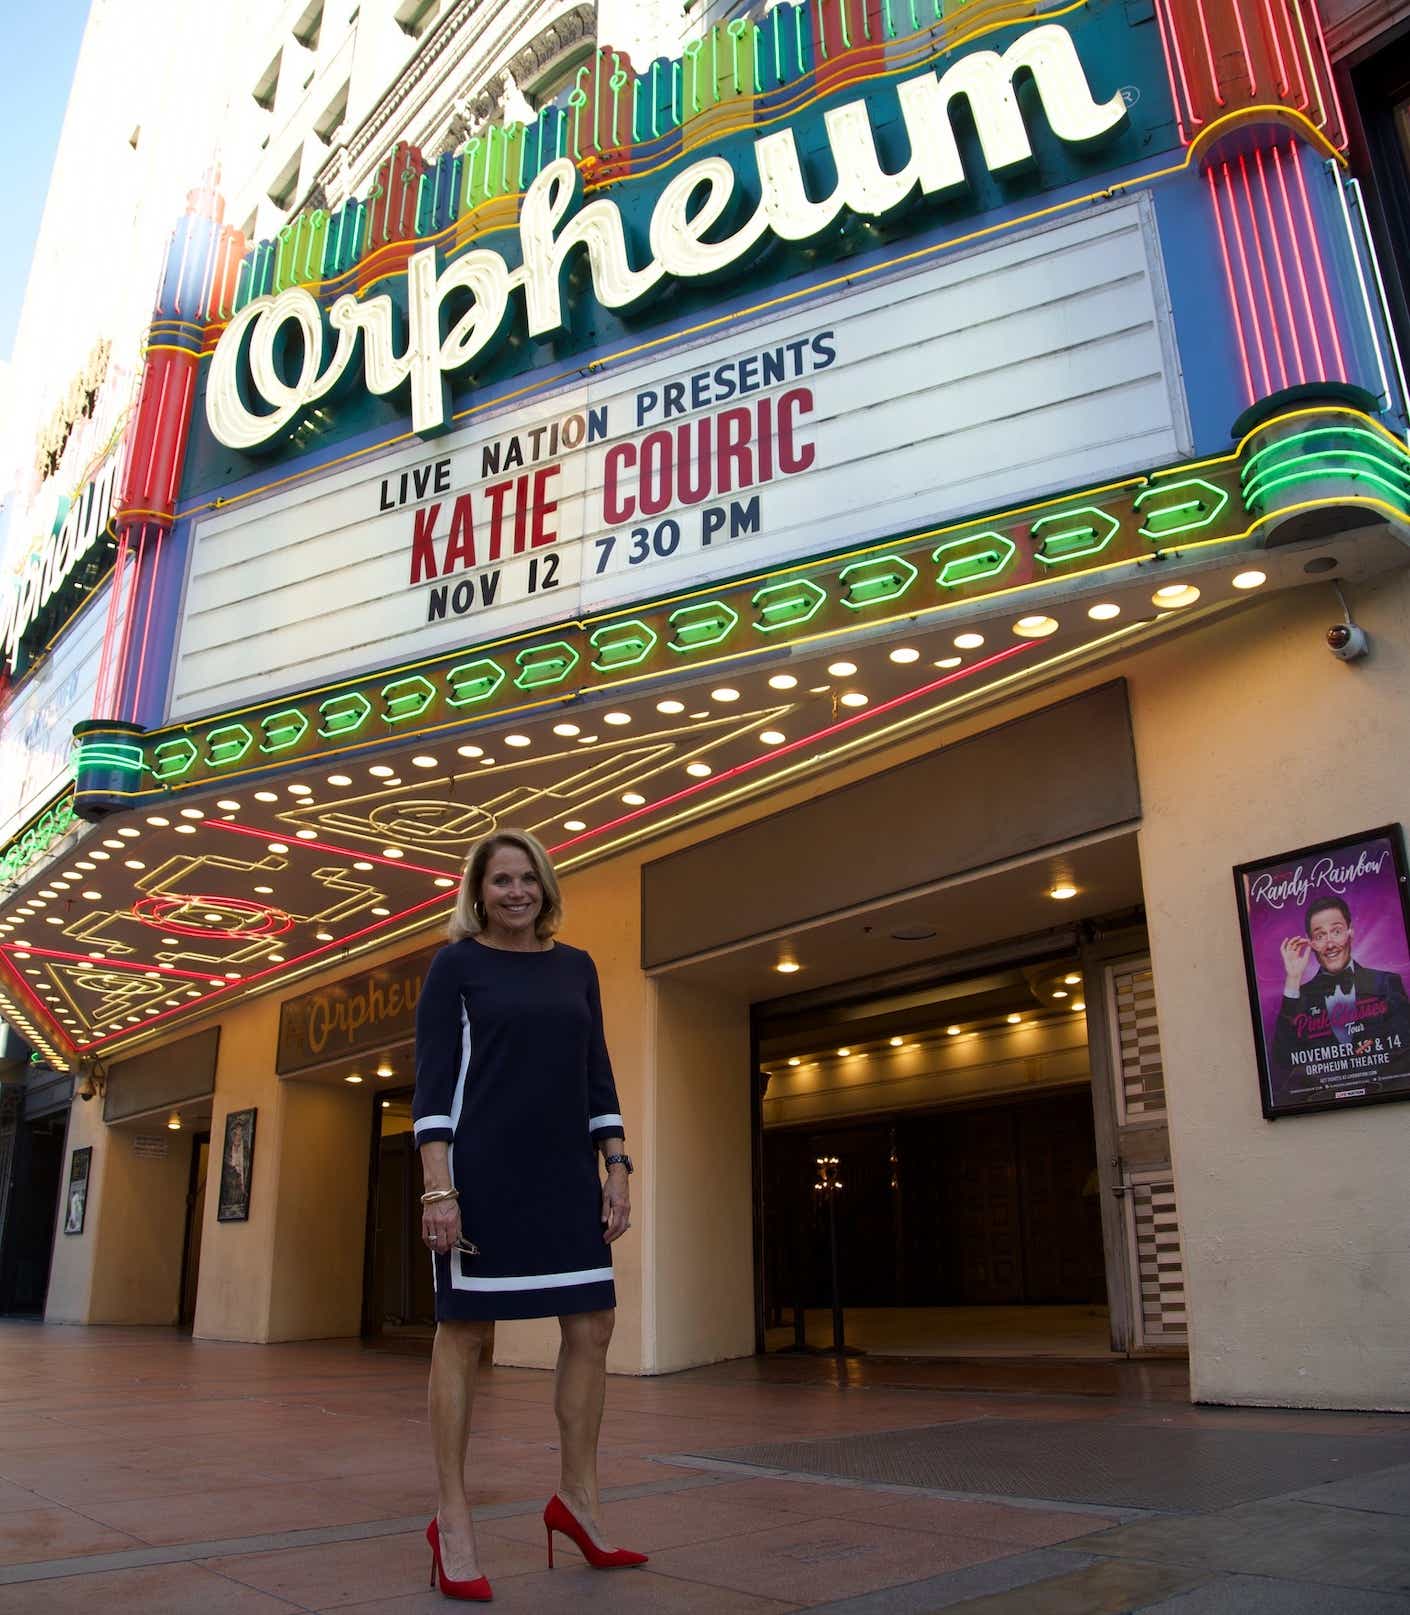 Katie Couric in front of the Orpheum Theater in Los Angeles in a navy blue dress